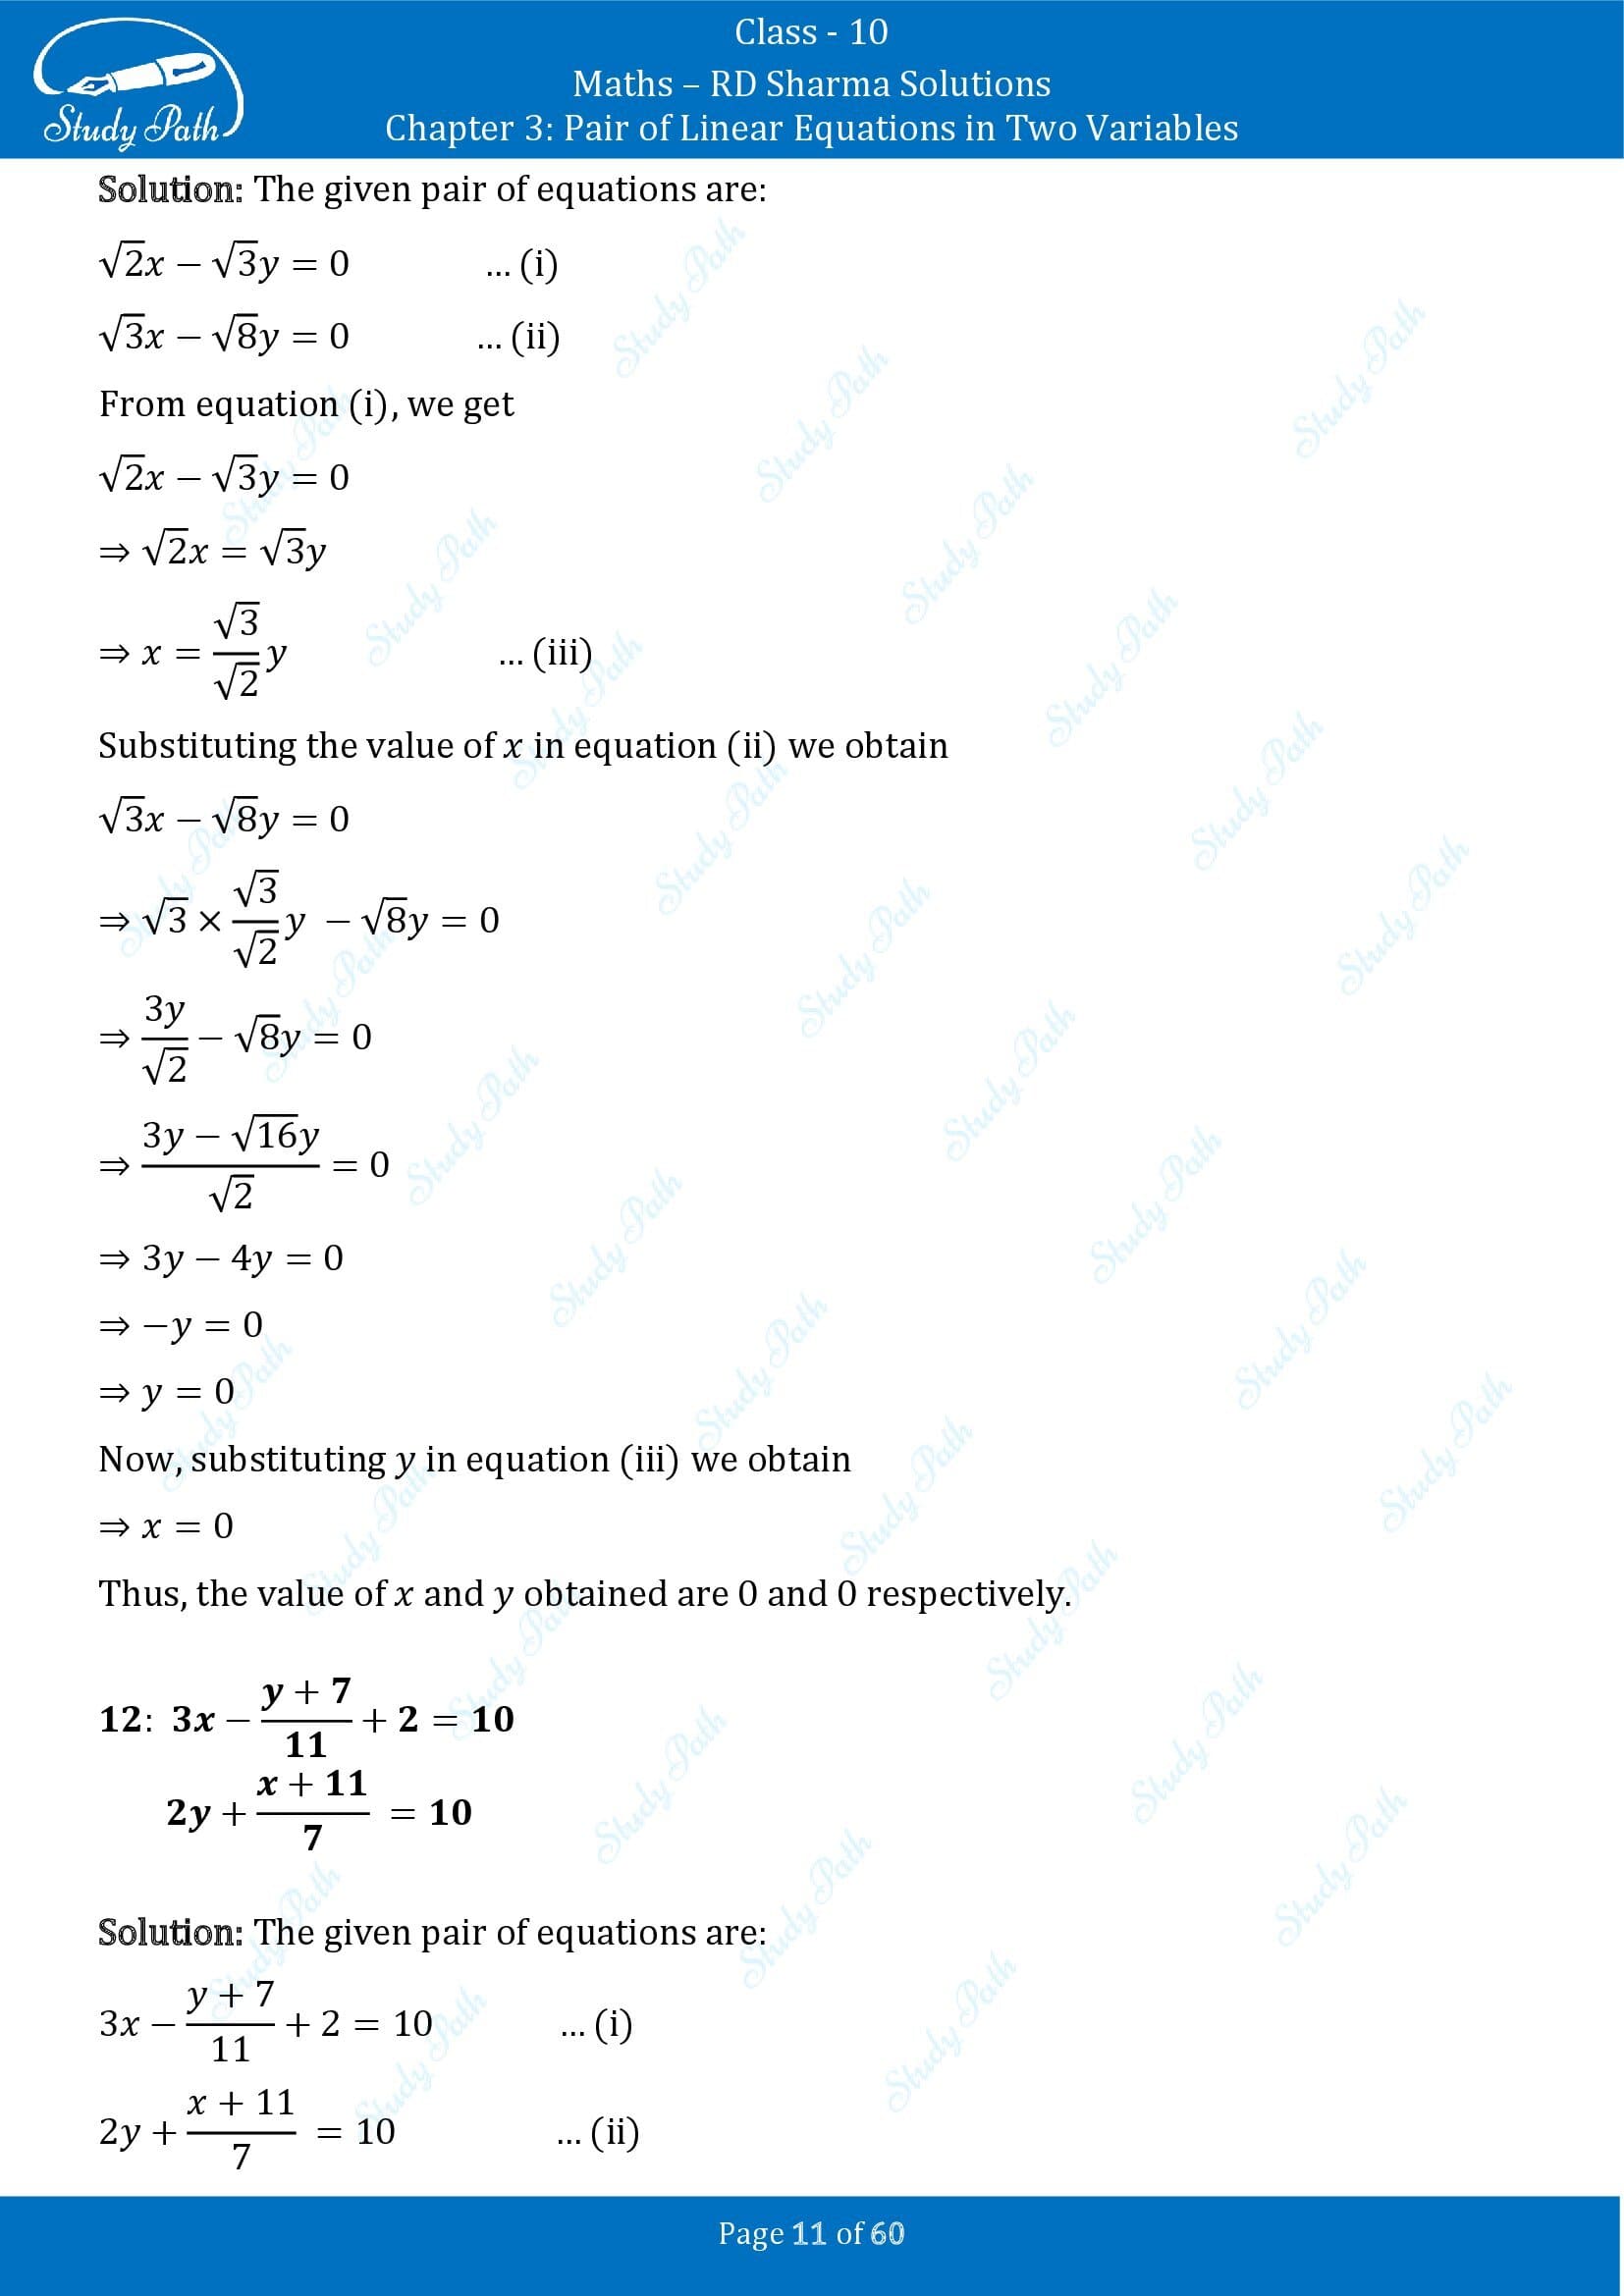 RD Sharma Solutions Class 10 Chapter 3 Pair of Linear Equations in Two Variables Exercise 3.3 00011